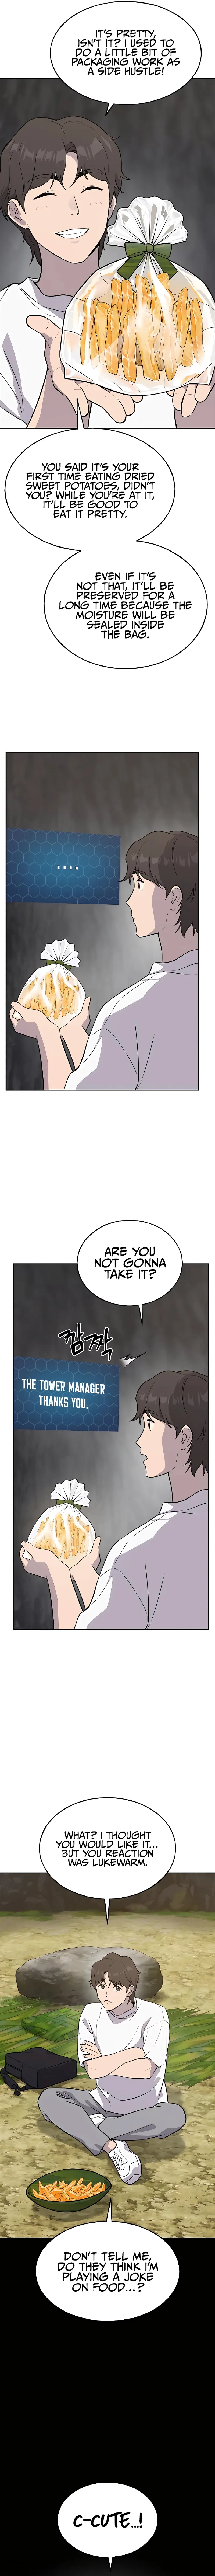 Solo Farming In The Tower Chapter 22 page 7